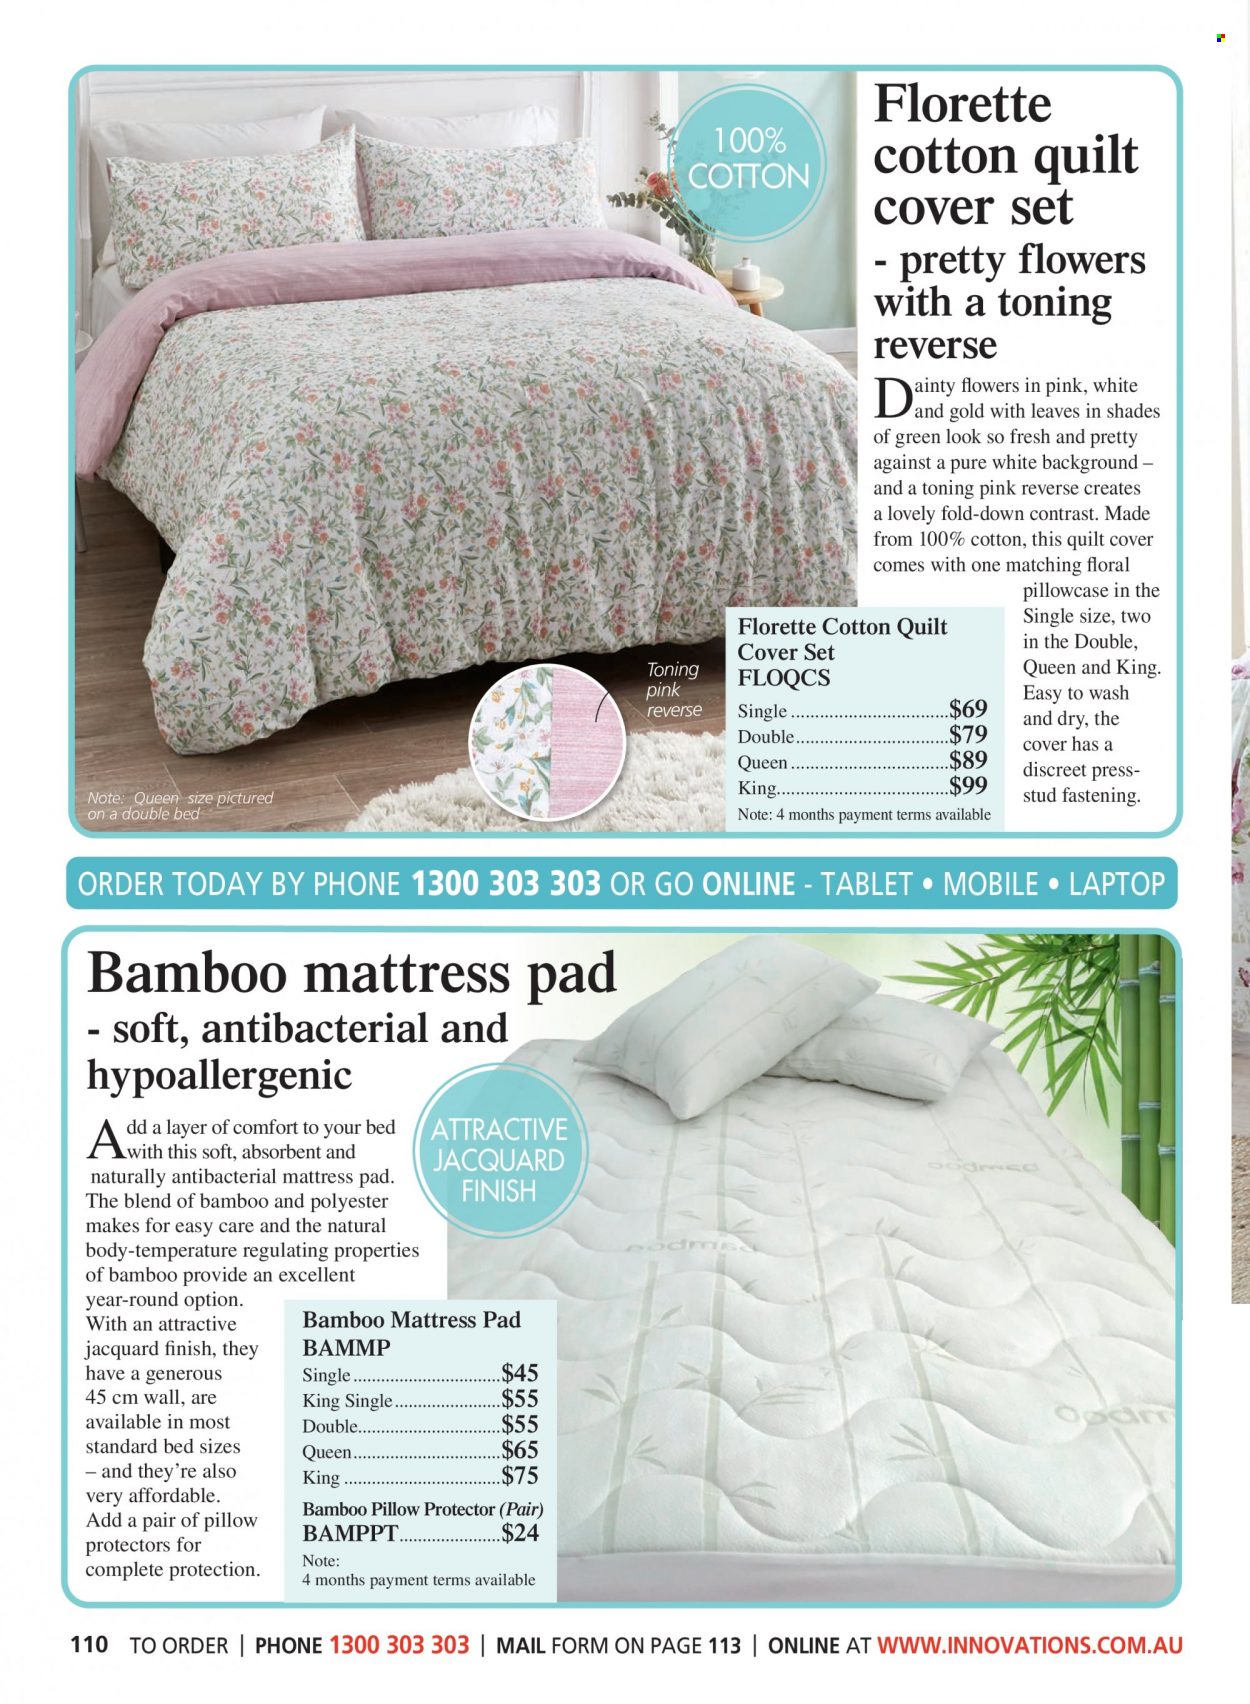 thumbnail - Innovations Catalogue - Sales products - pillow, pillowcase, quilt, mattress protector, cotton quilt, quilt cover set. Page 110.